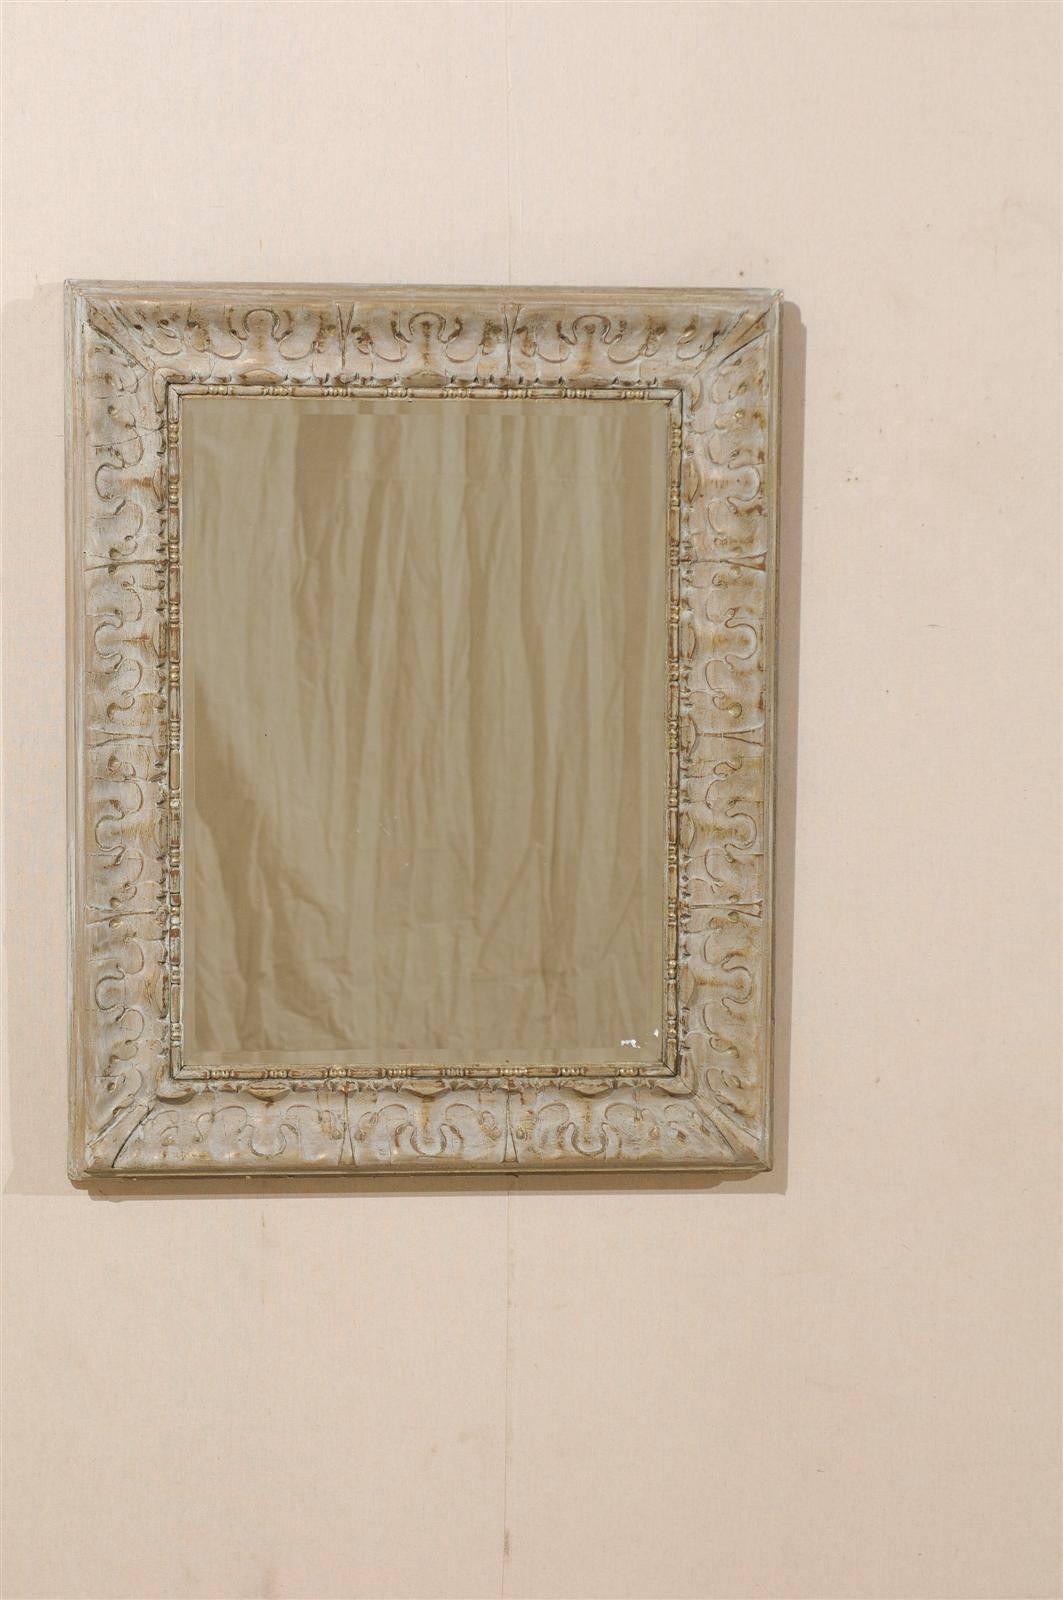 A pair of Venetian style mirrors with nicely carved and painted wood frames. These 20th century American made mirrors have a subtle and unique stylized swirl patterned border. In the inner surround of the border there is also a nice bead motif